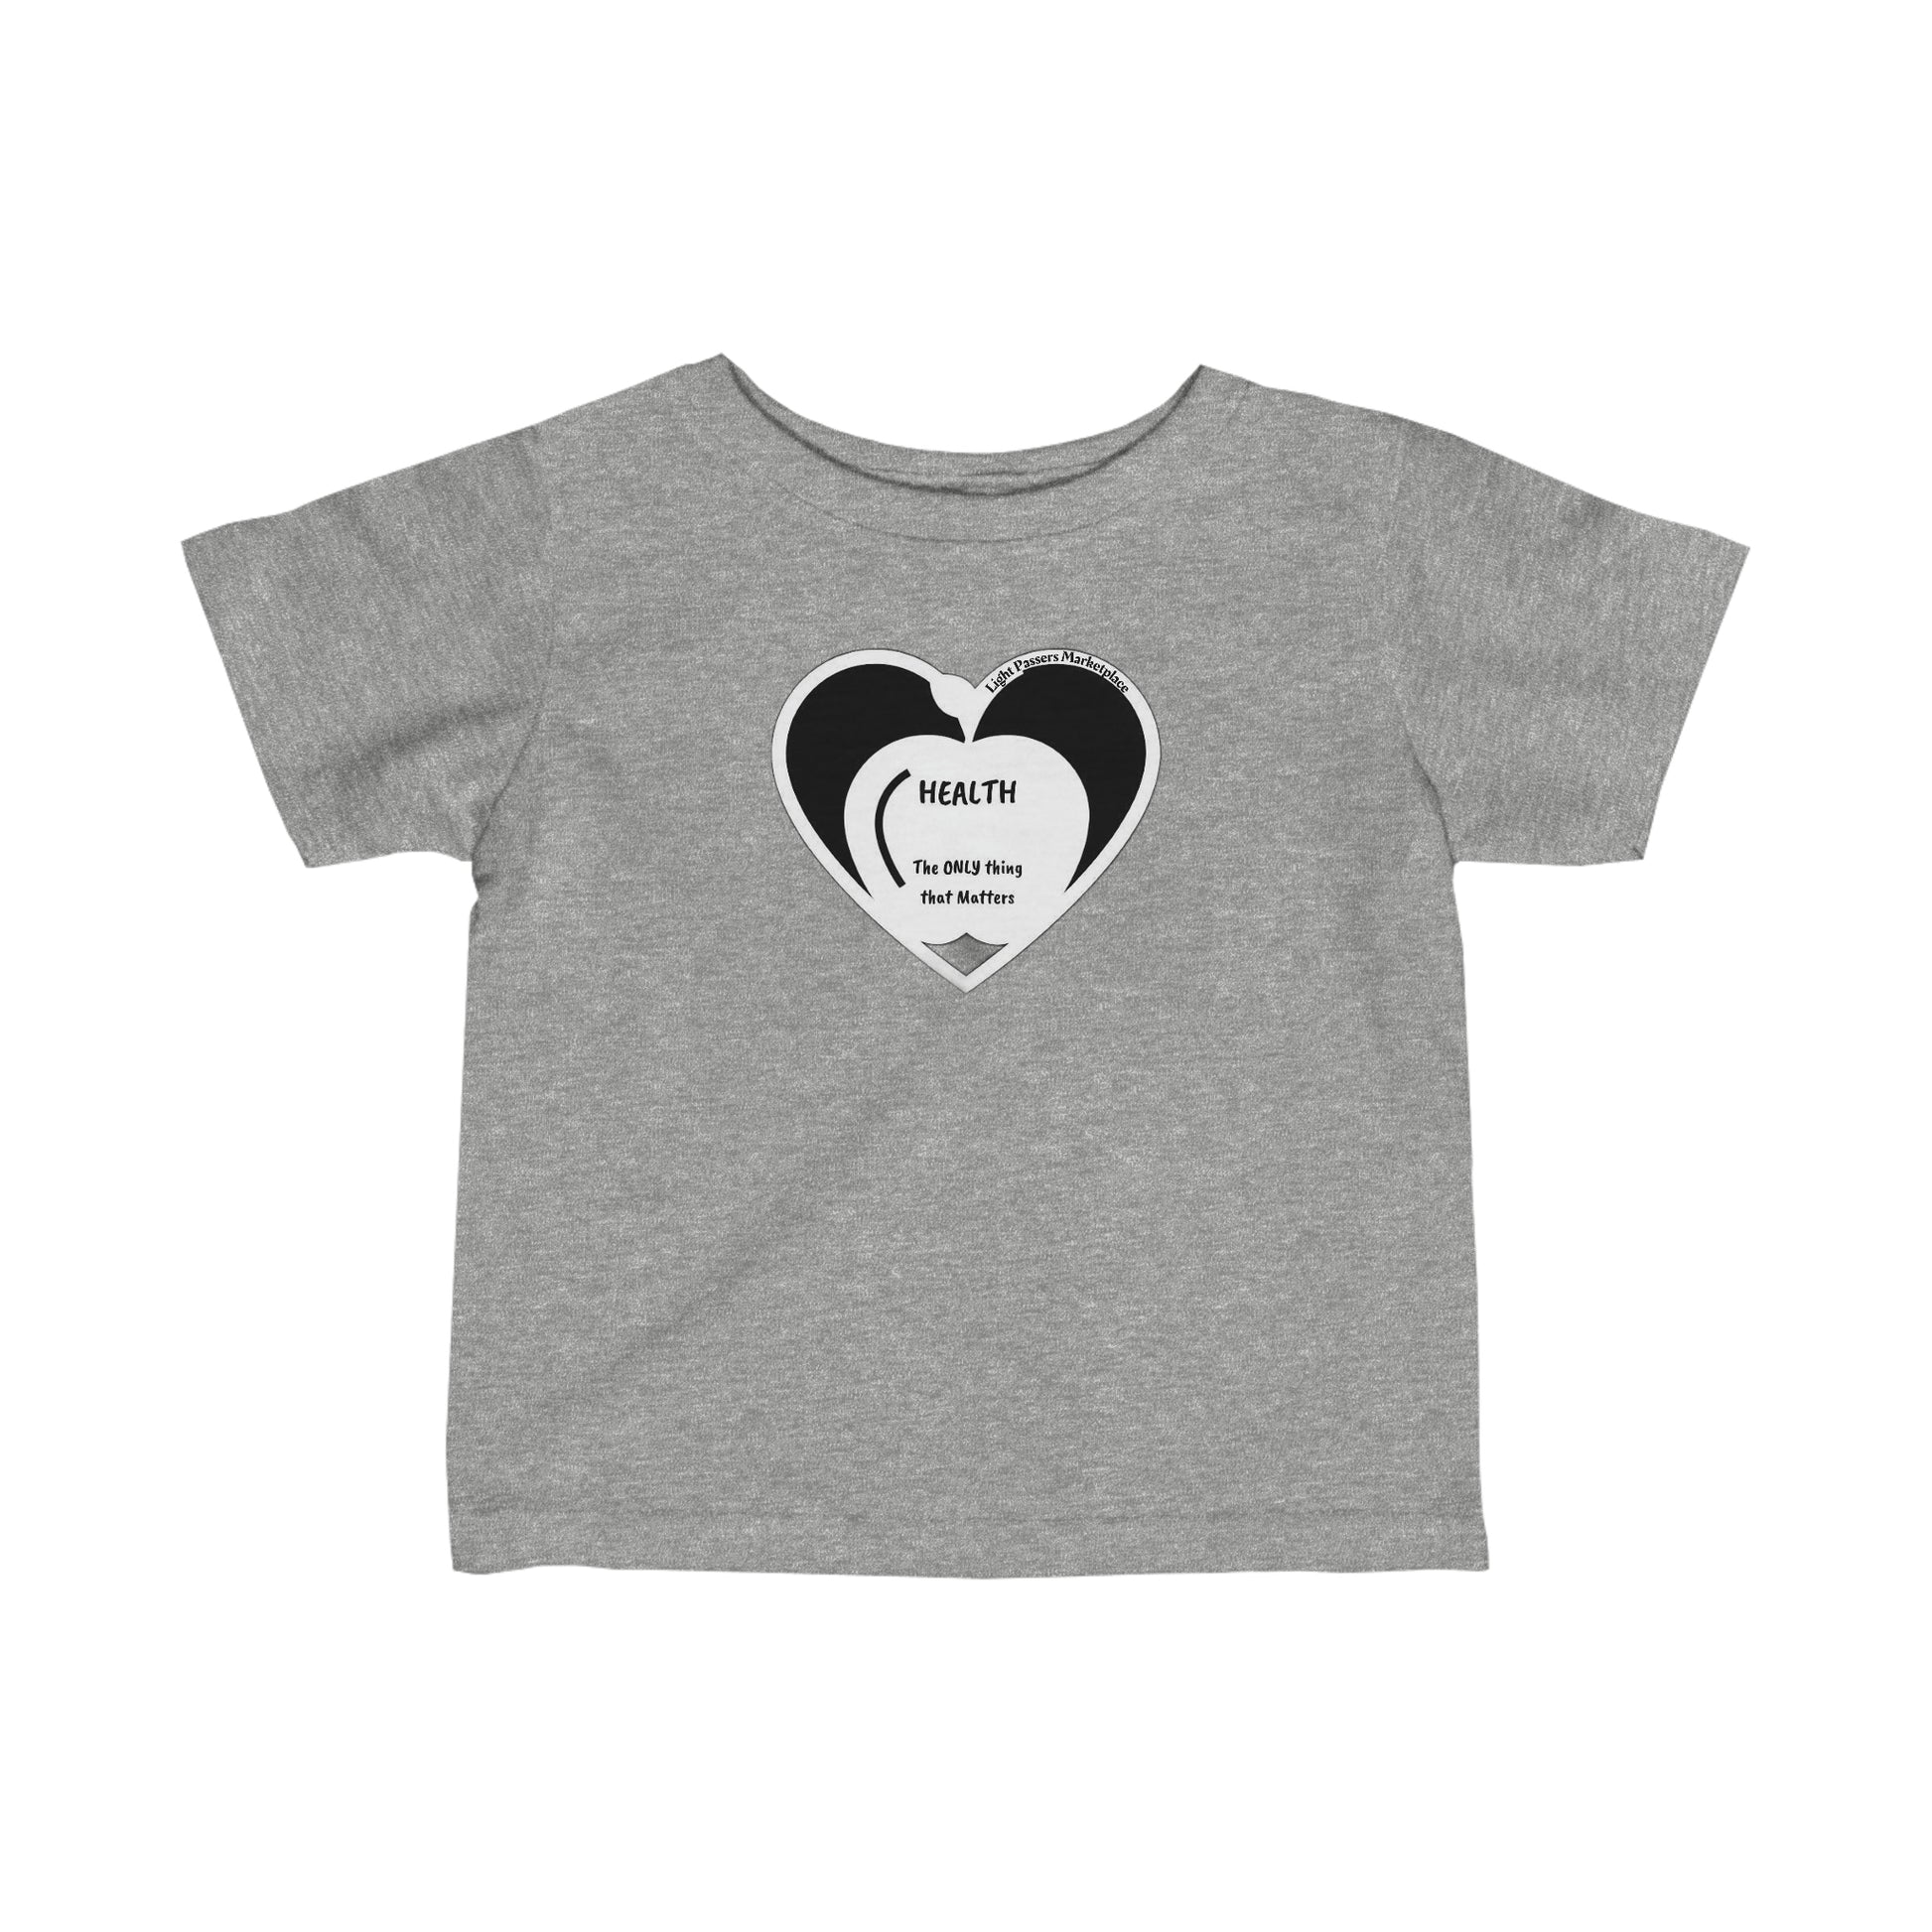 Infant fine jersey tee with heart graphic, side seams, ribbed knitting, and taped shoulders for durability and comfort. 100% Combed ringspun cotton, light fabric, classic fit. Apple Health Infant T-shirts Baby.